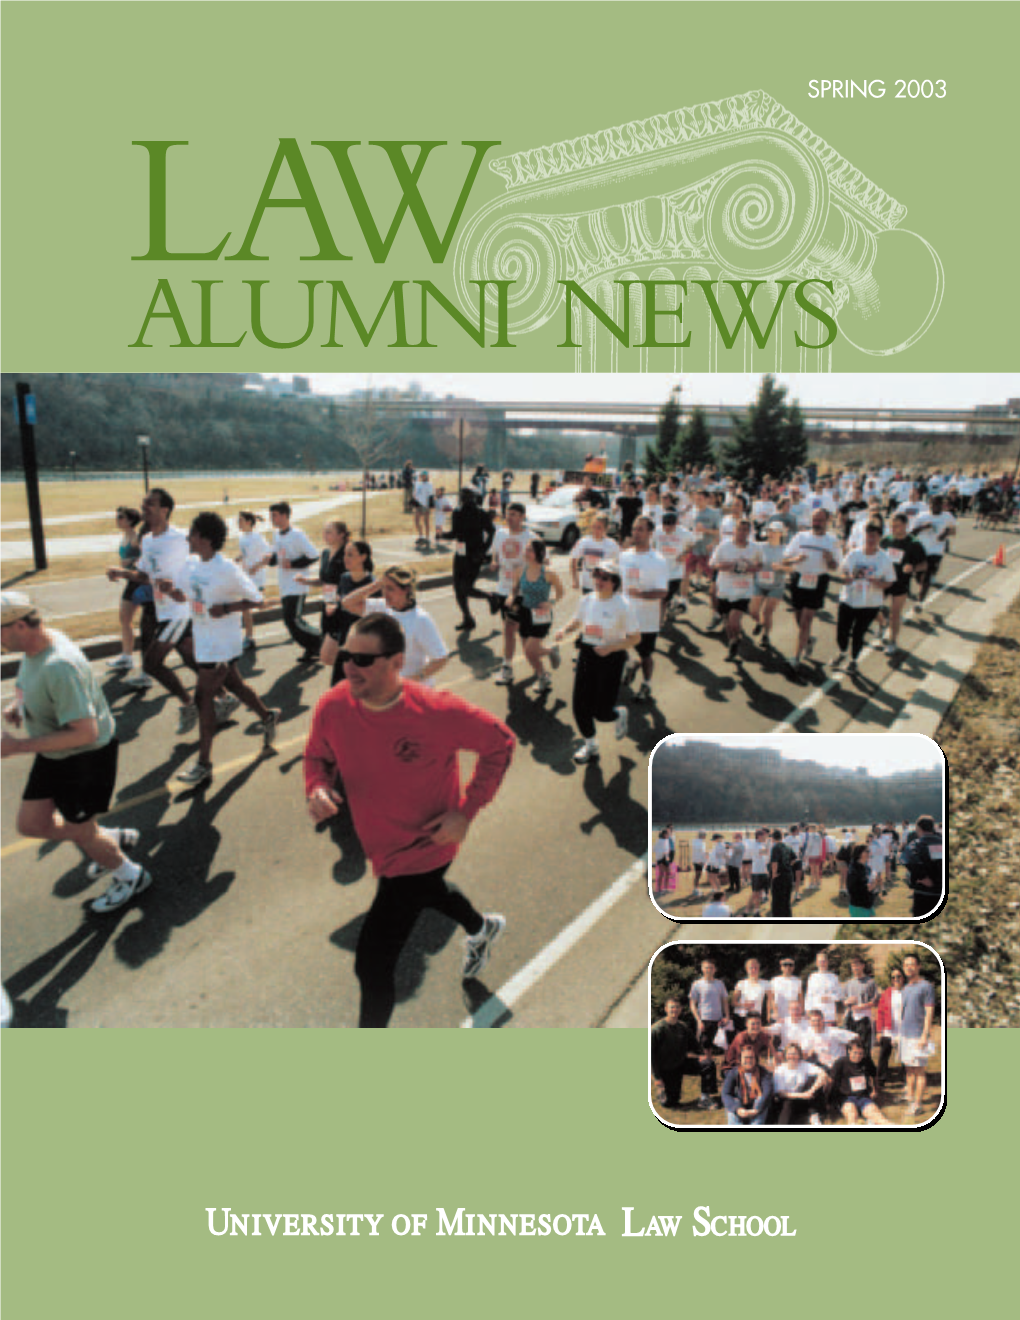 ALUMNI NEWS Cover S03b 7/15/03 10:59 AM Page 4